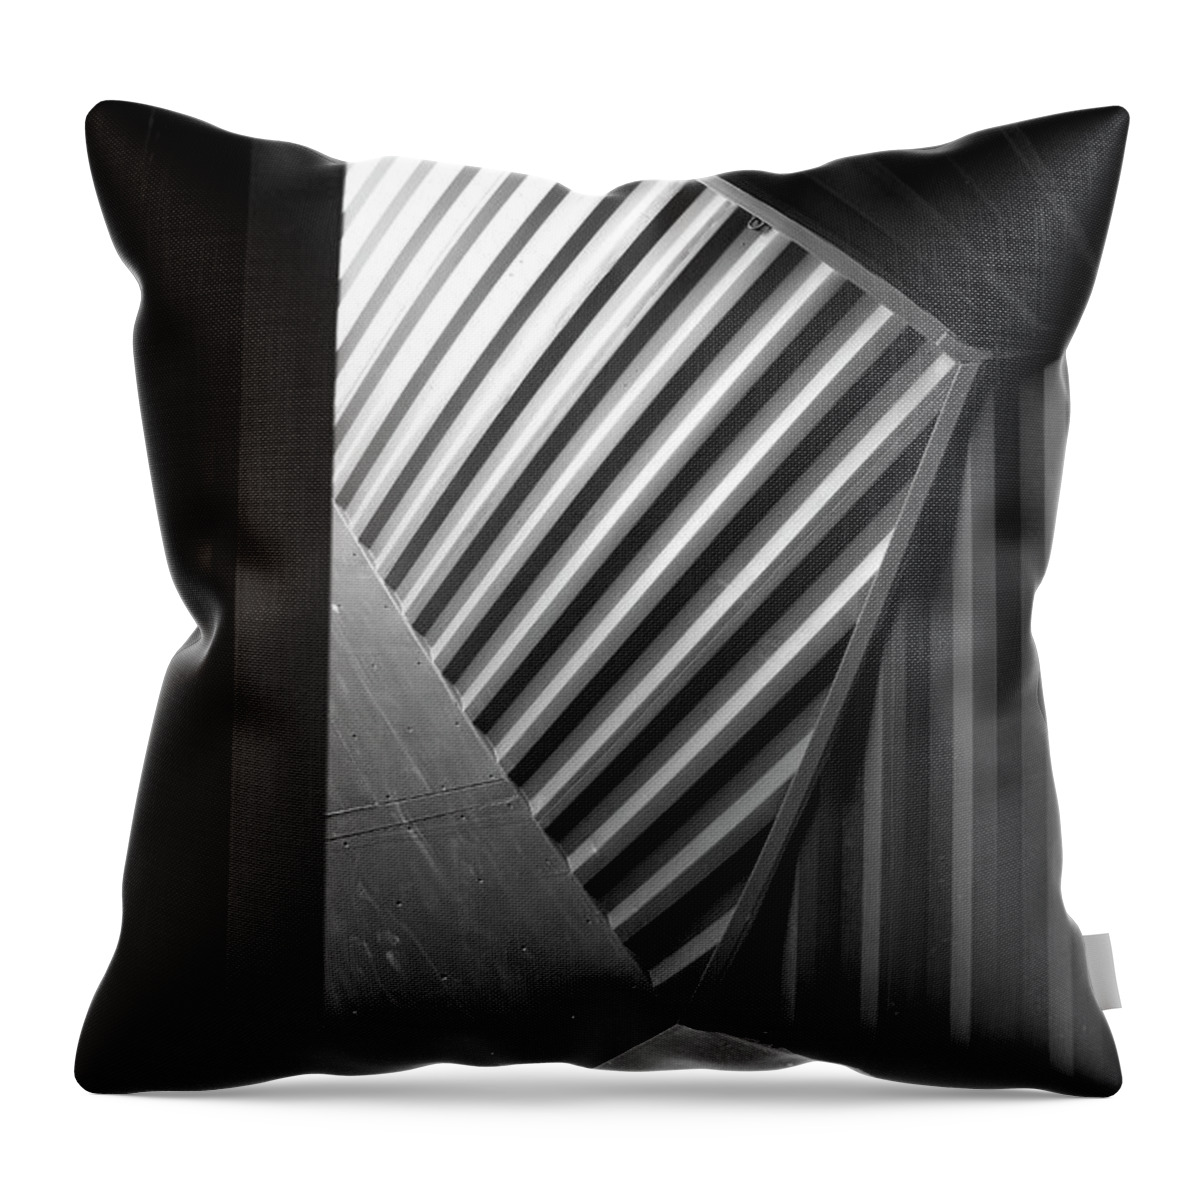 Devils Corner Throw Pillow featuring the photograph Devils Corner by Anthony Davey